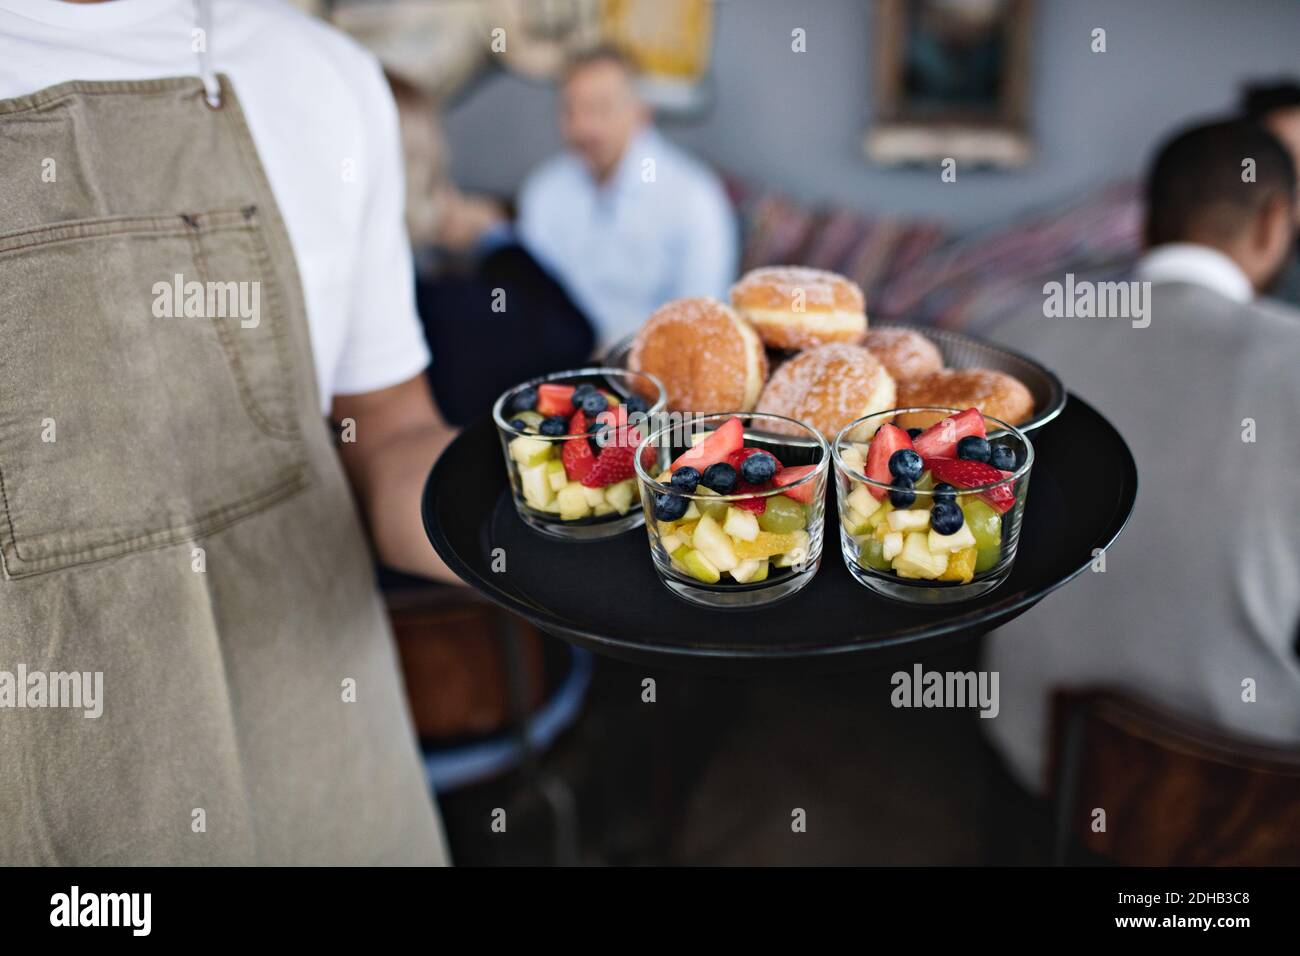 Midsection of owner holding food in serving tray at restaurant Stock Photo